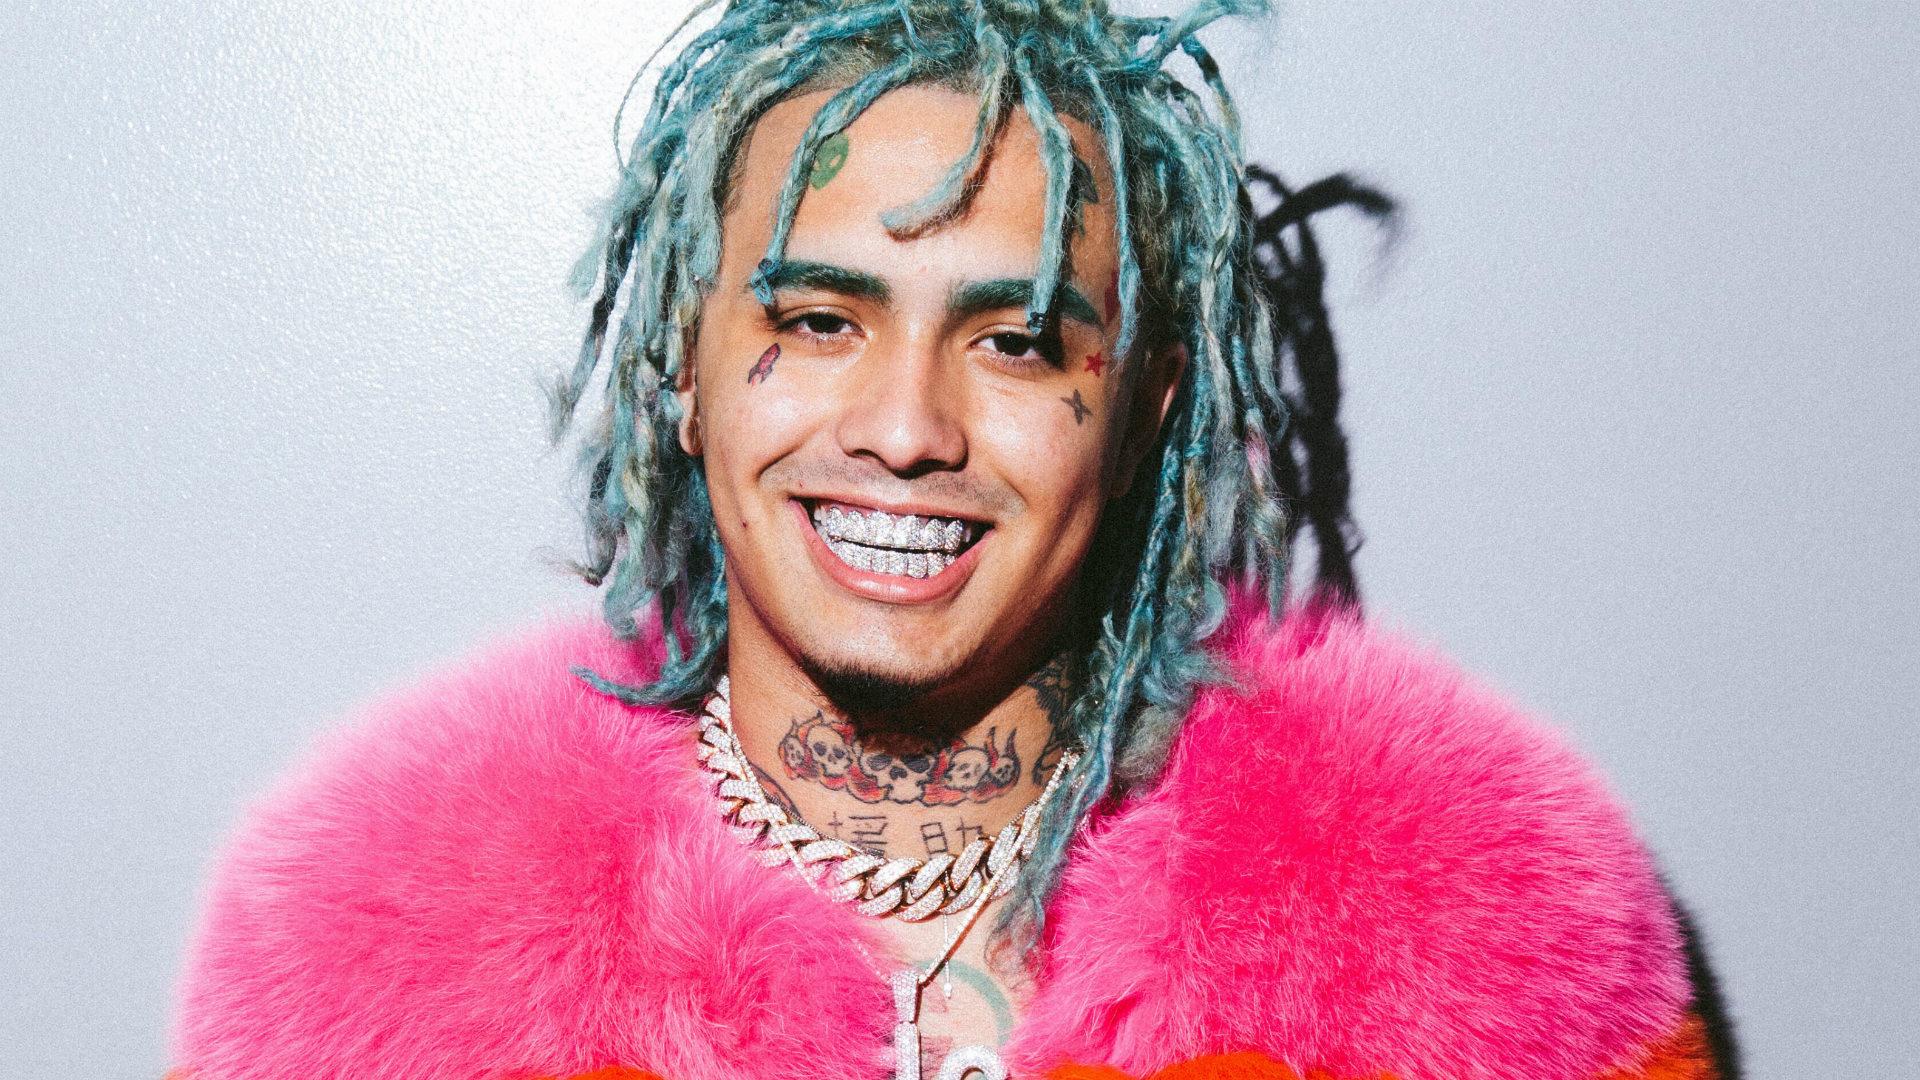 Chinese Rappers Beef with Lil Pump After Racism Storm: Here